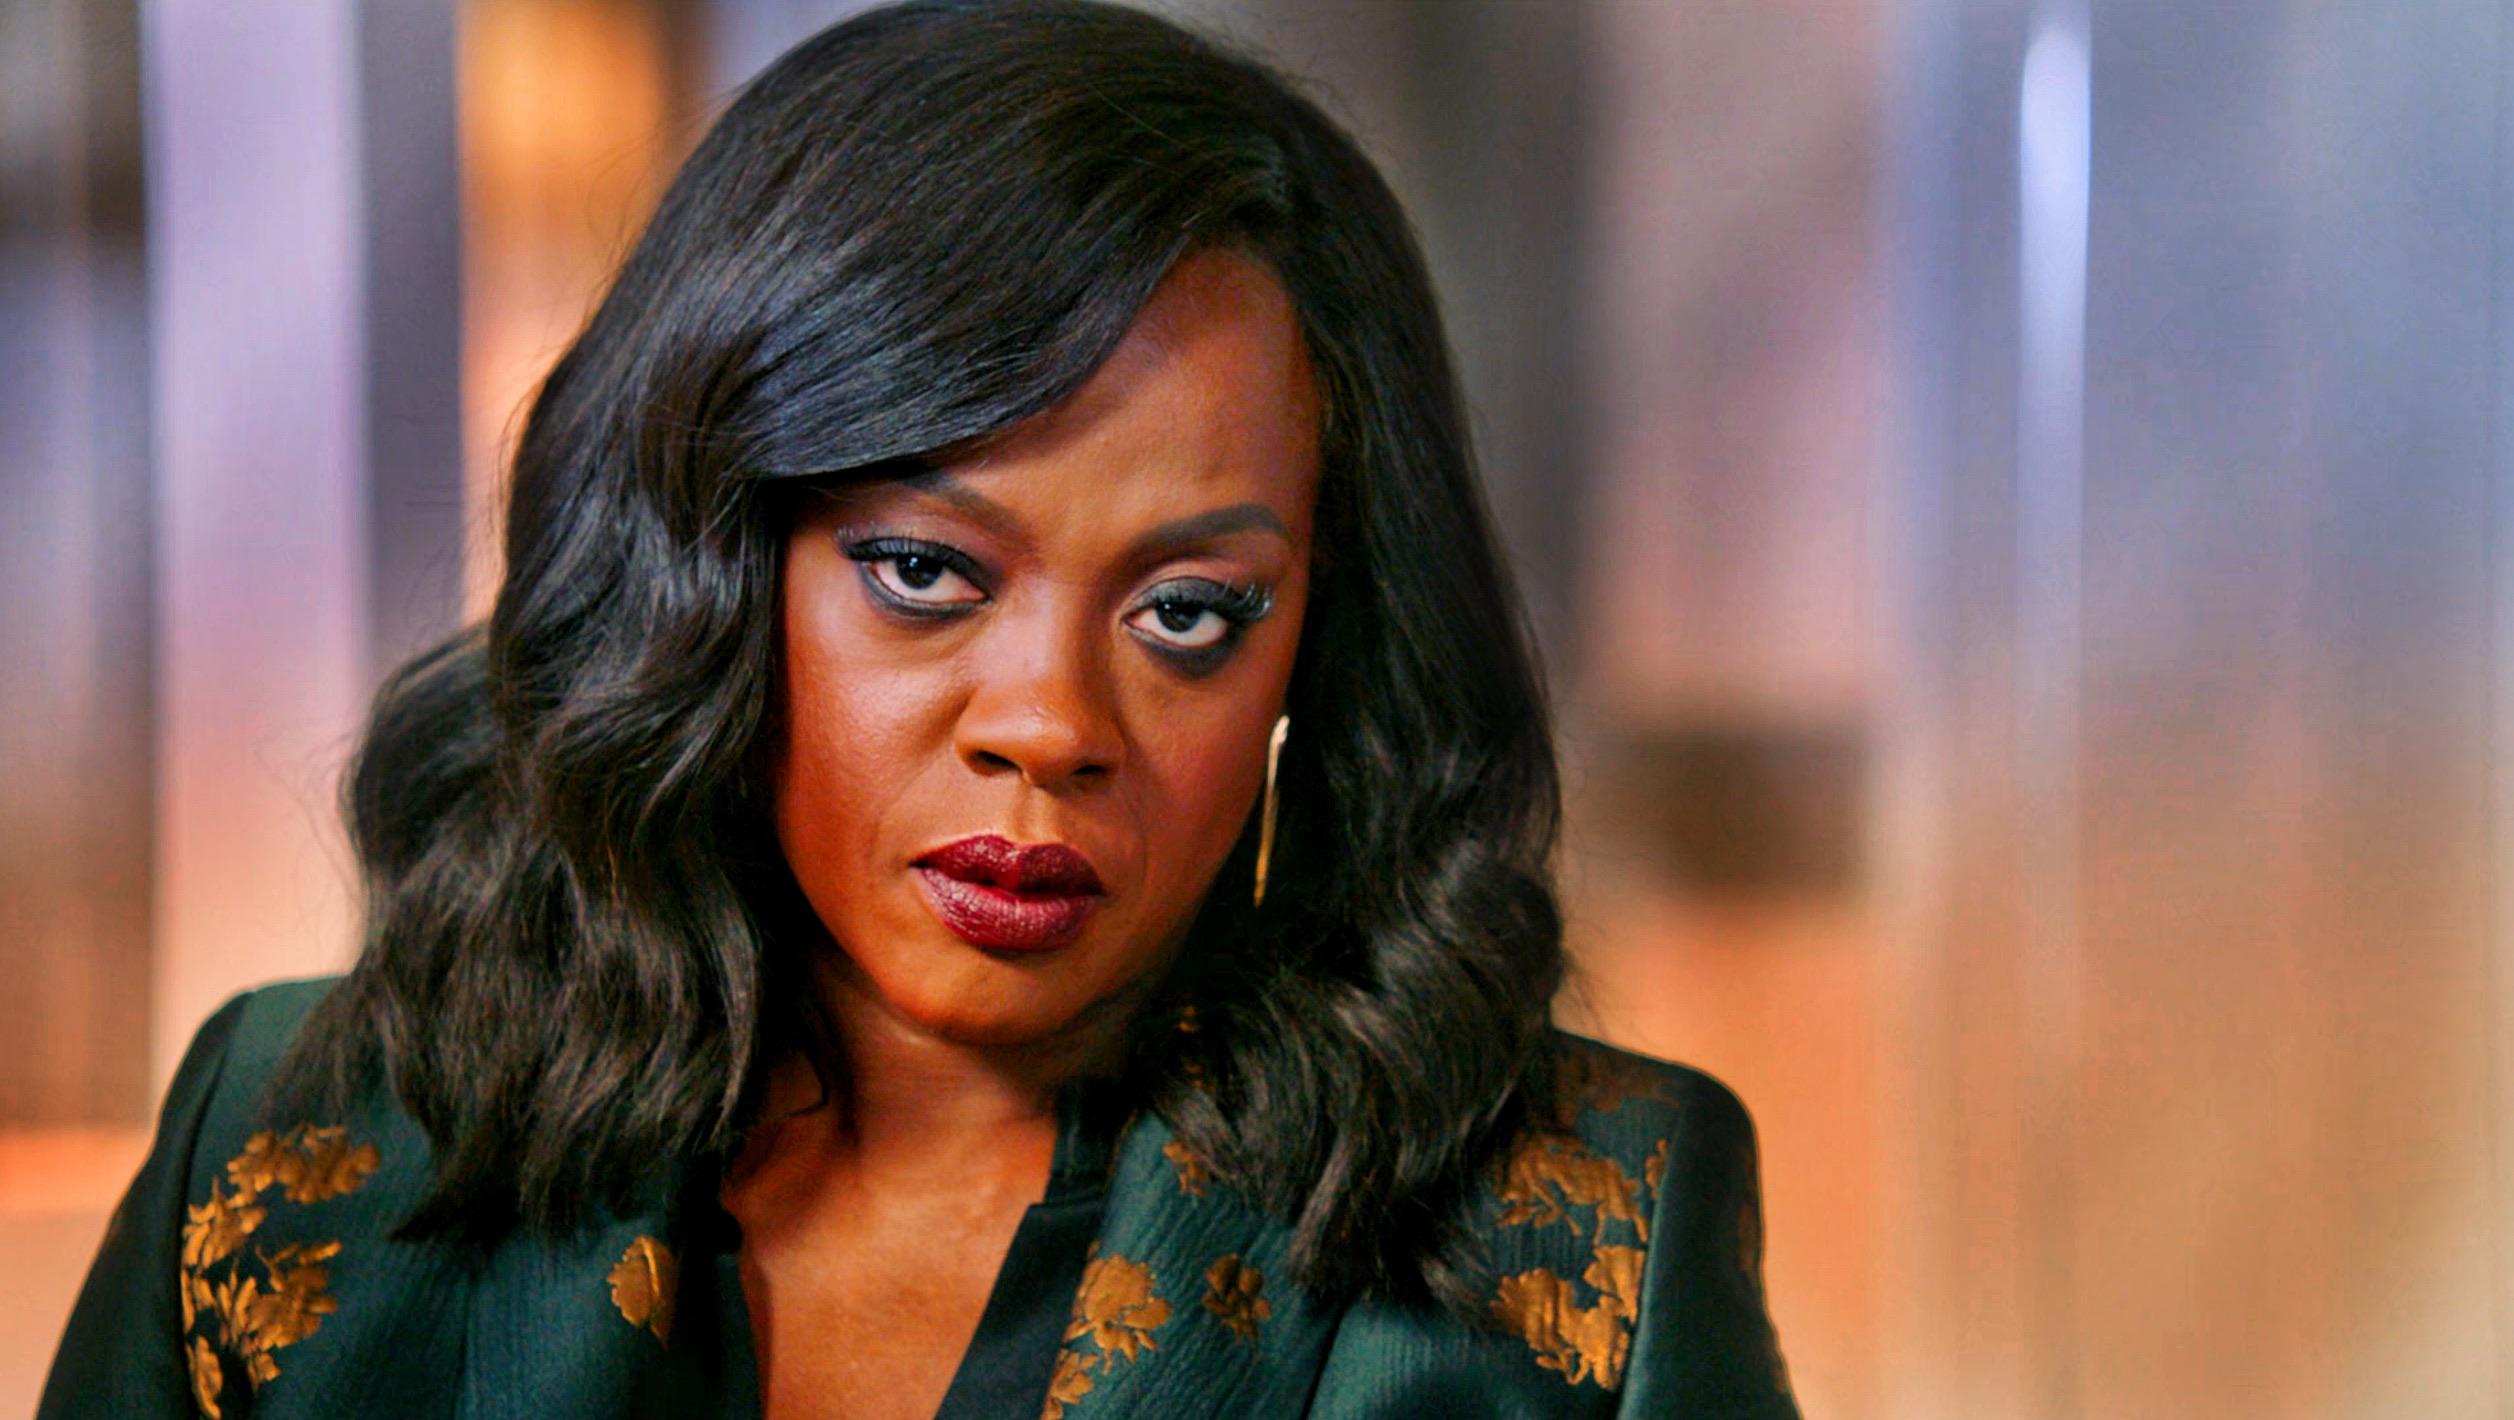 Annalise i How to get away with murder